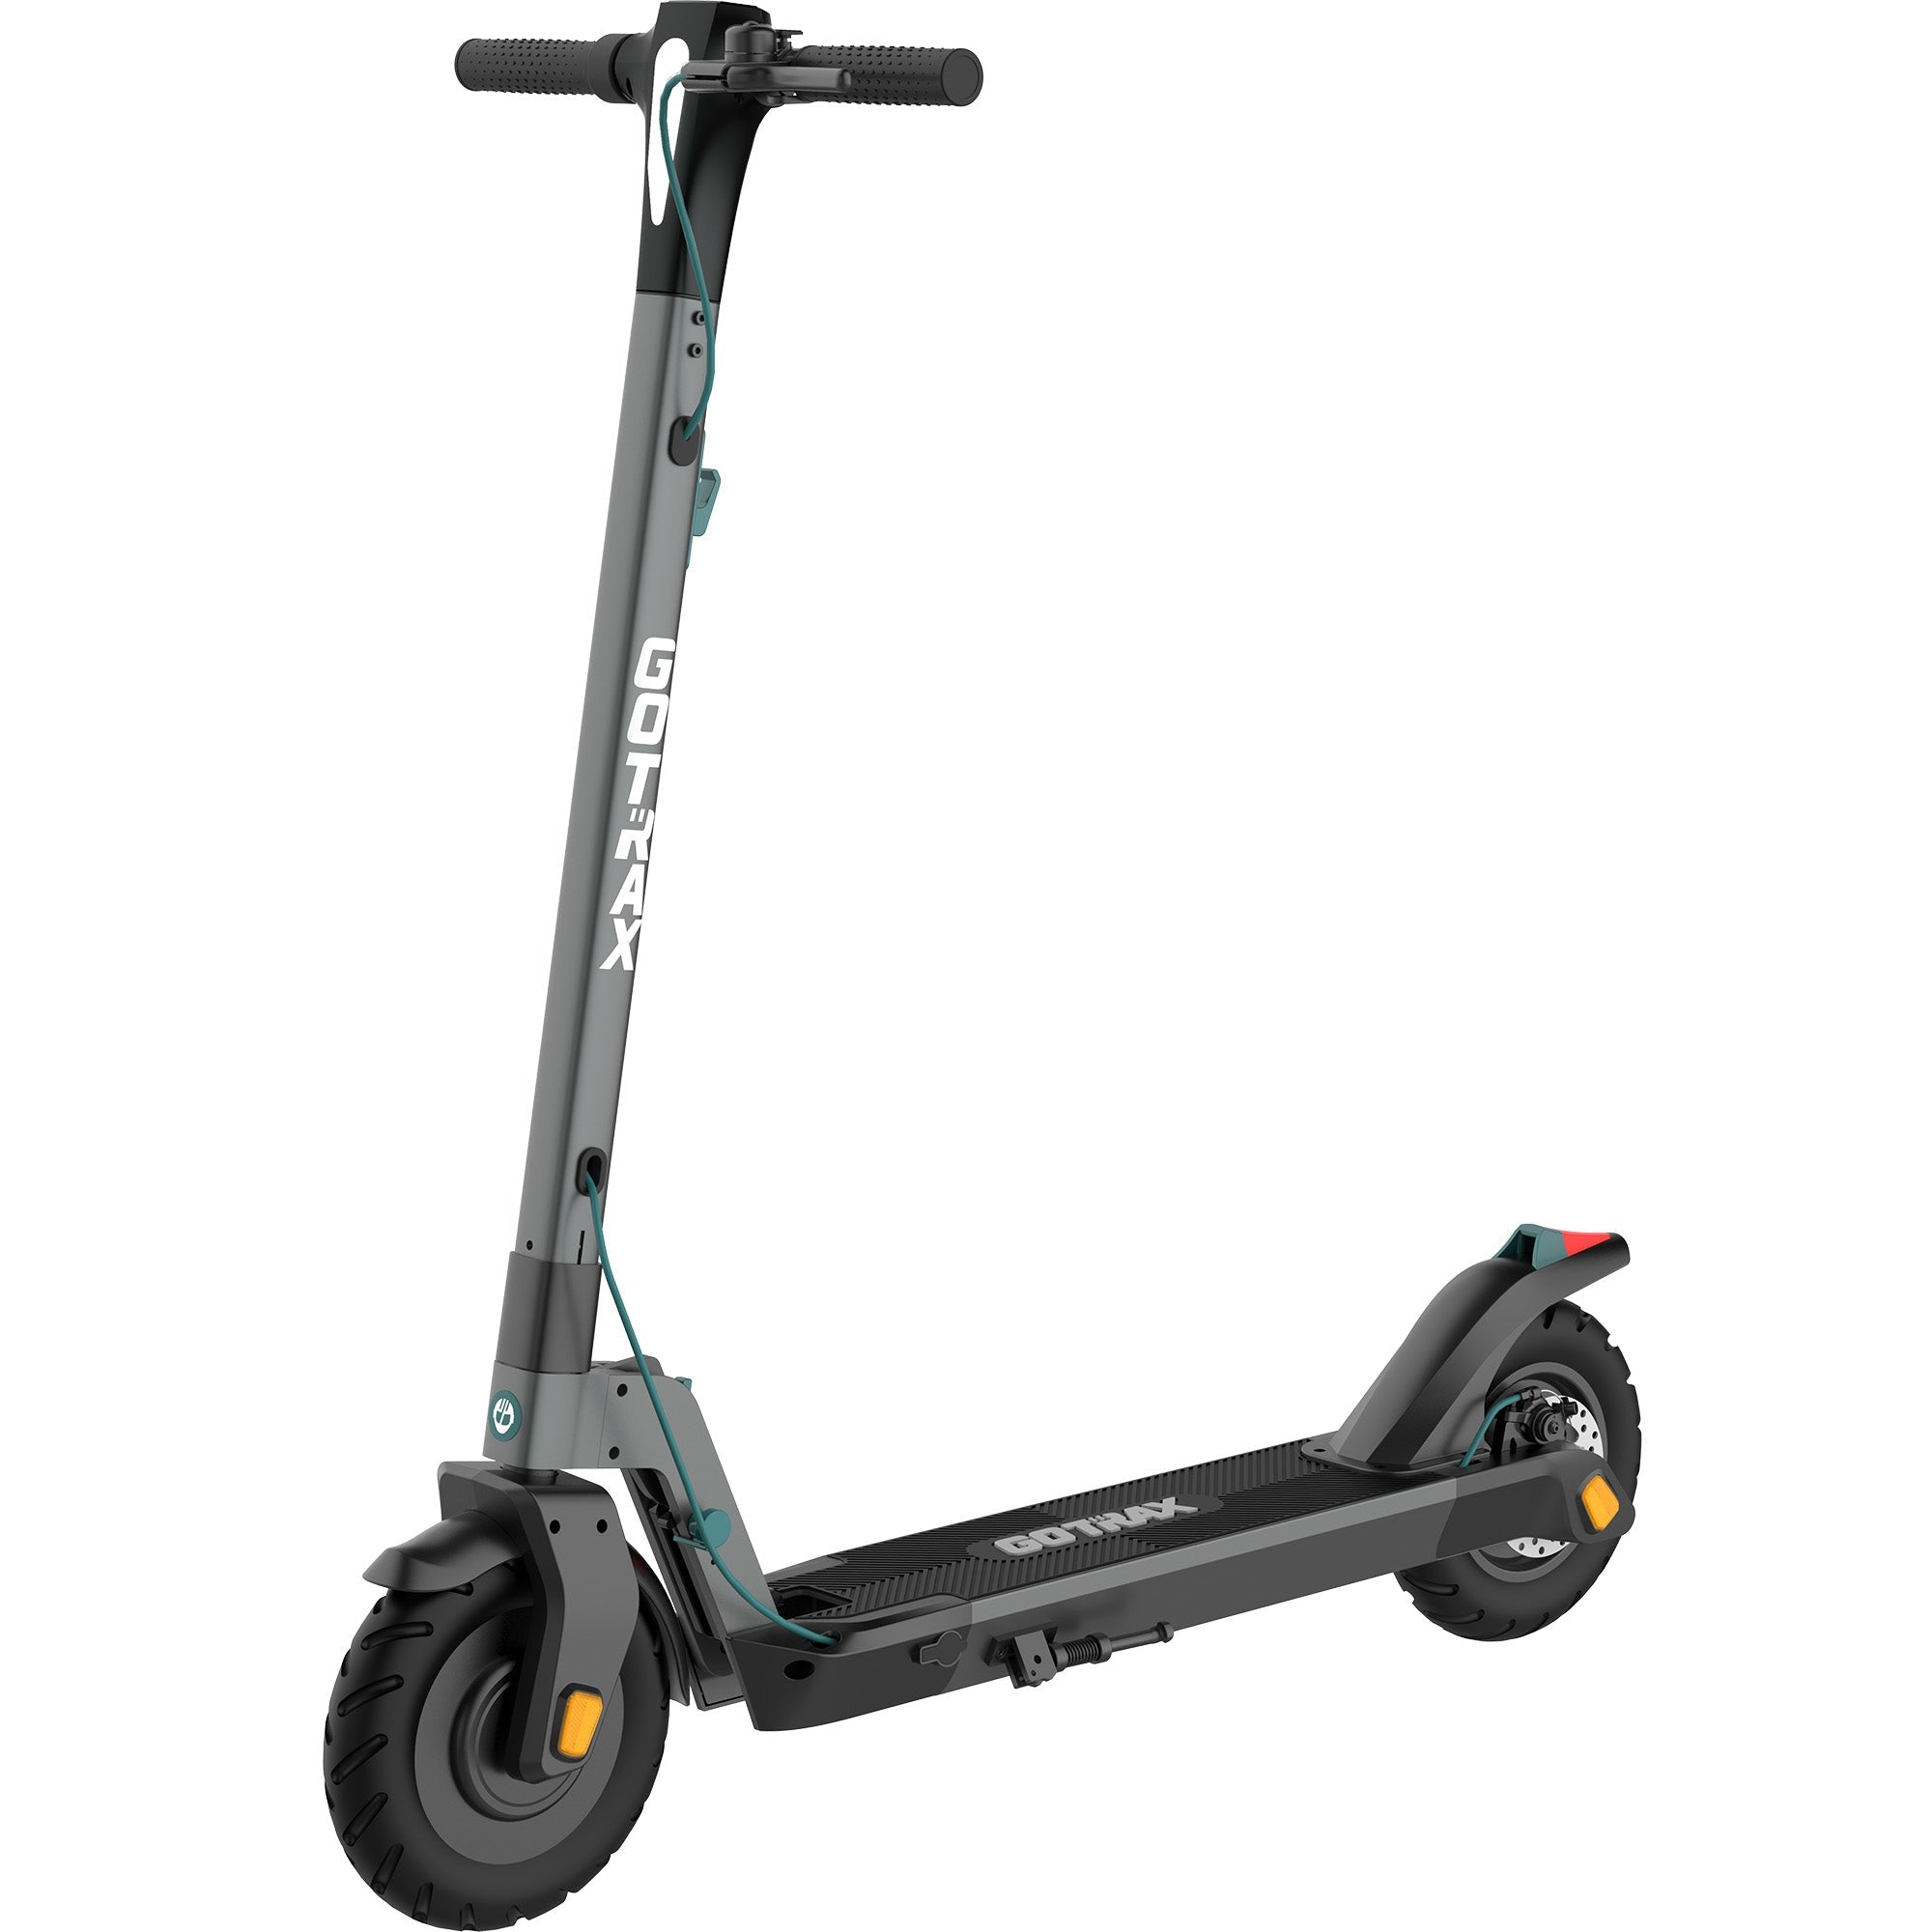 G3 Plus Electric Scooter